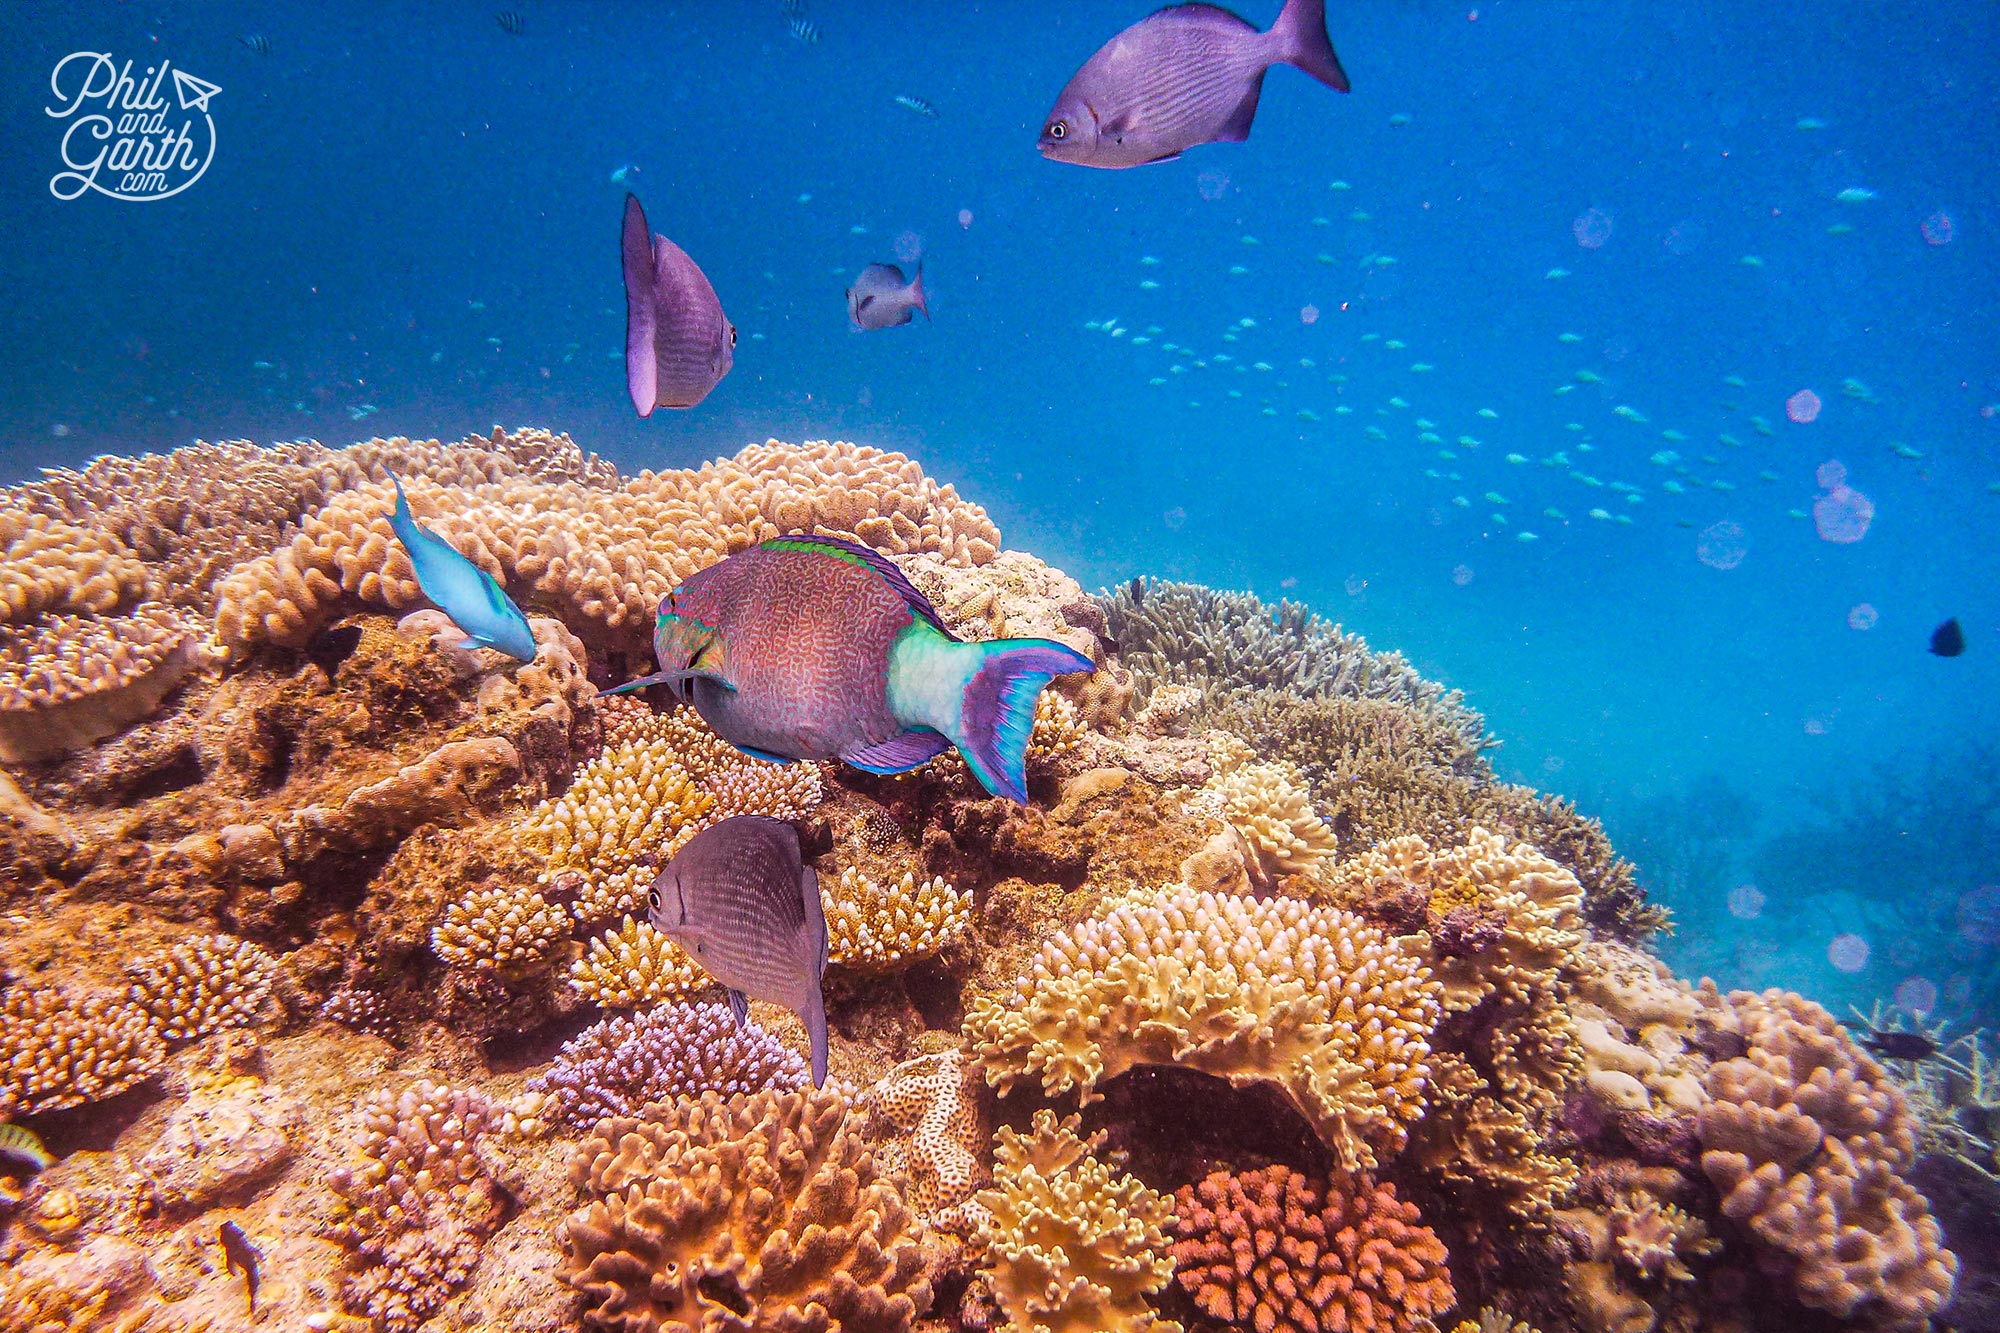 There's over 1,500 species of fish on the Great Barrier Reef